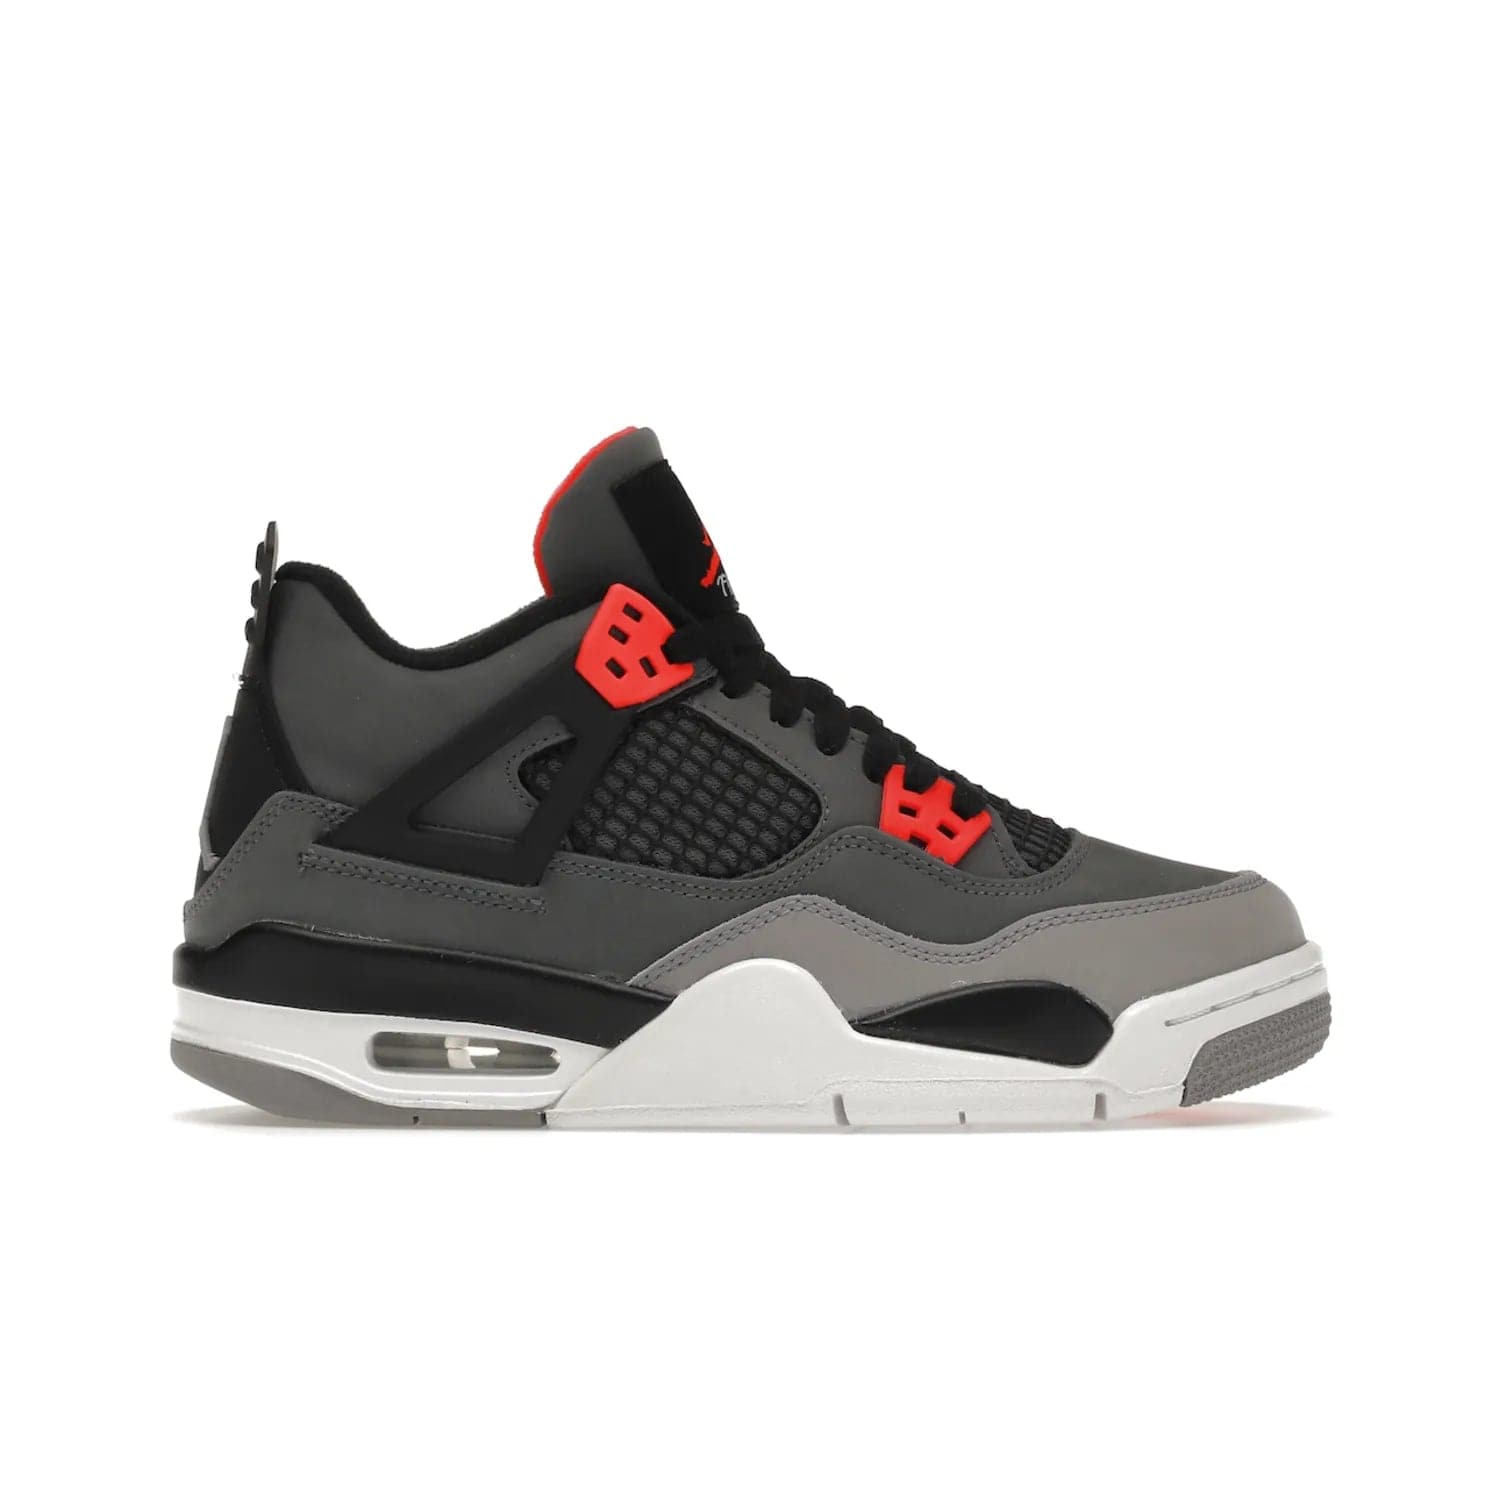 Jordan 4 Retro Infrared (GS) - Image 1 - Only at www.BallersClubKickz.com - Shop the Air Jordan 4 Retro Infrared (GS) for a classic silhouette with subtle yet bold features. Dark grey nubuck upper with lighter forefoot overlay, black accents, Infrared molded eyelets & woven tongue tag. Available June 2022.